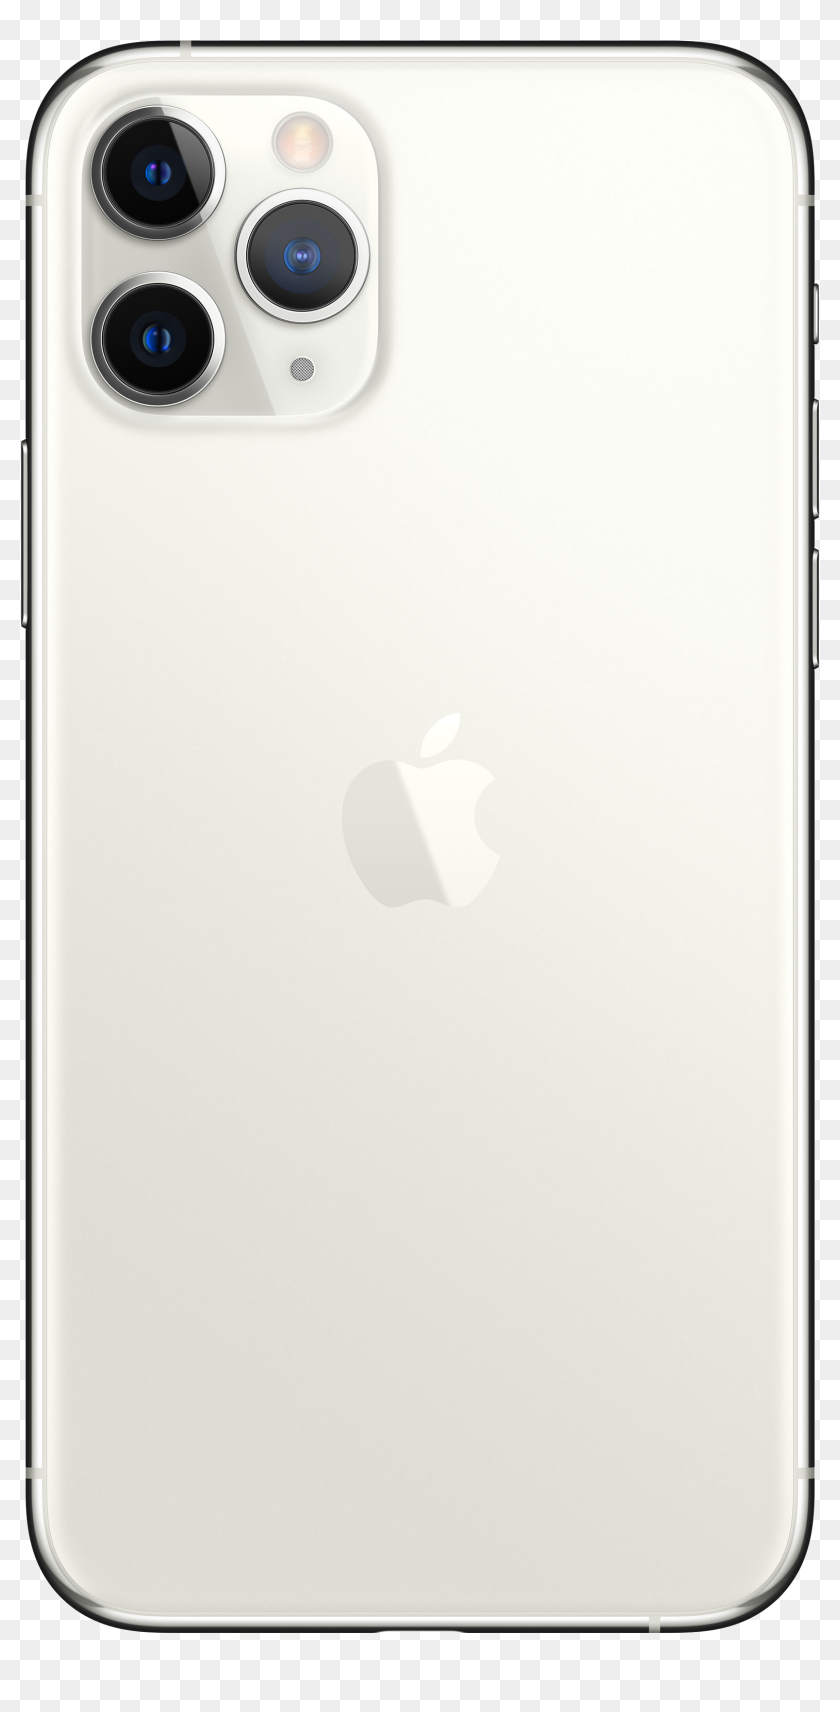 Iphone Camera Icon Png, Transparent Png - 1611x3137(#6885142) - PngFind